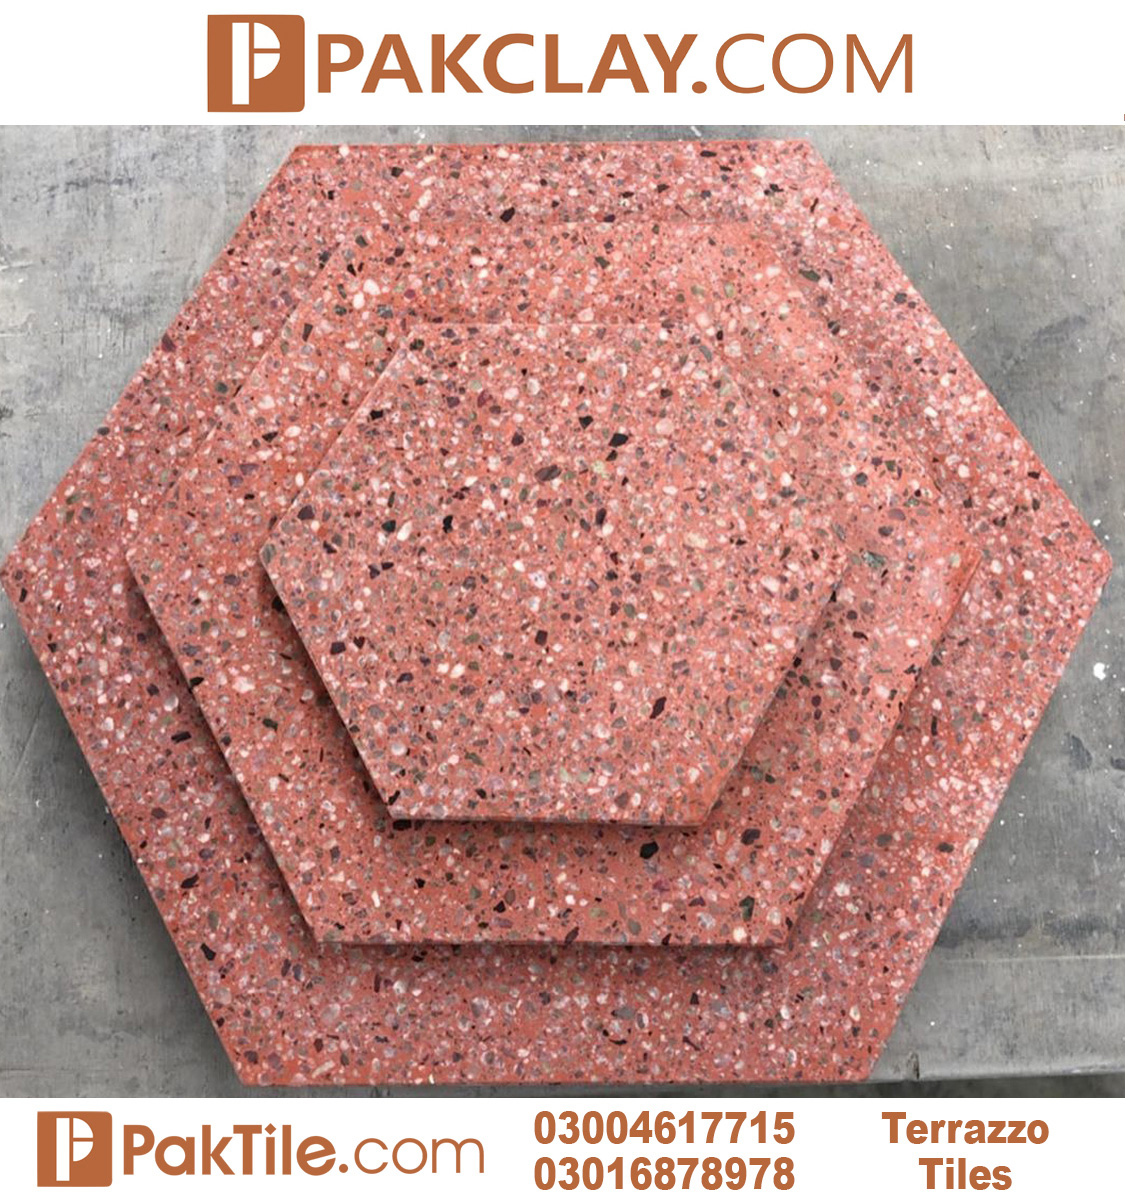 Small Terrazzo tiles thickness in mm